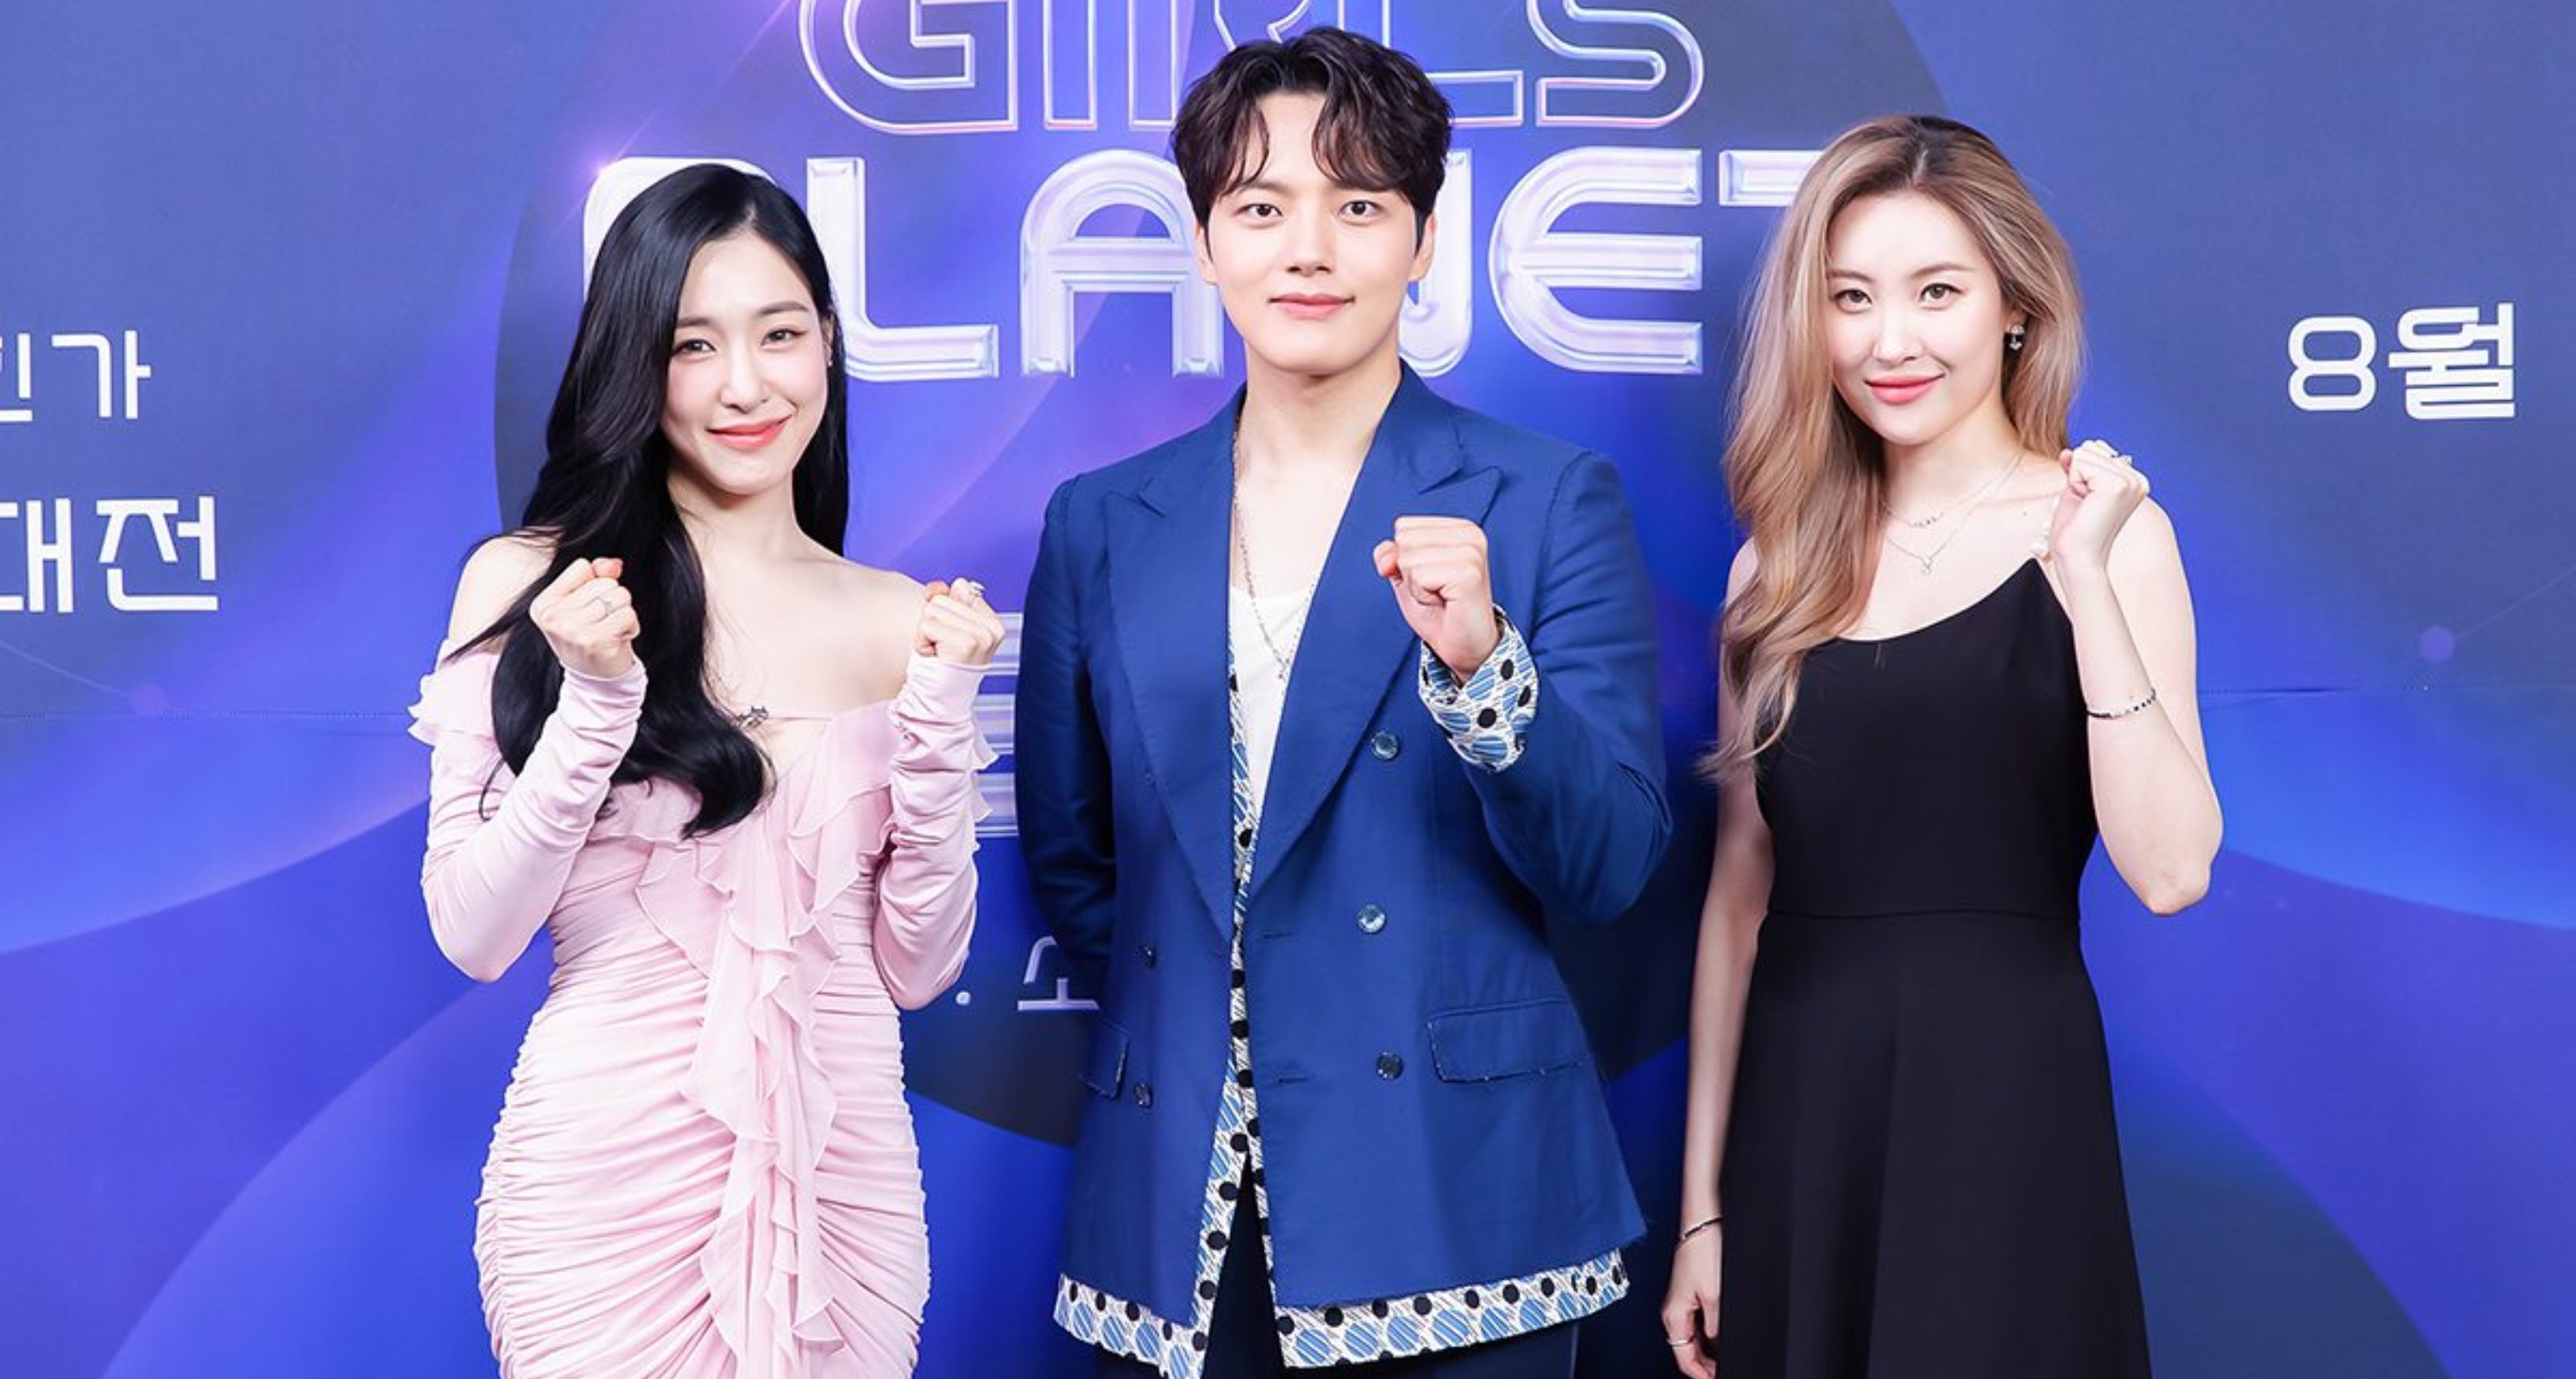 Tiffany Young, Yeo Jin-Goo and Sunmi 'Girls Planet 999' posing in front of show banner